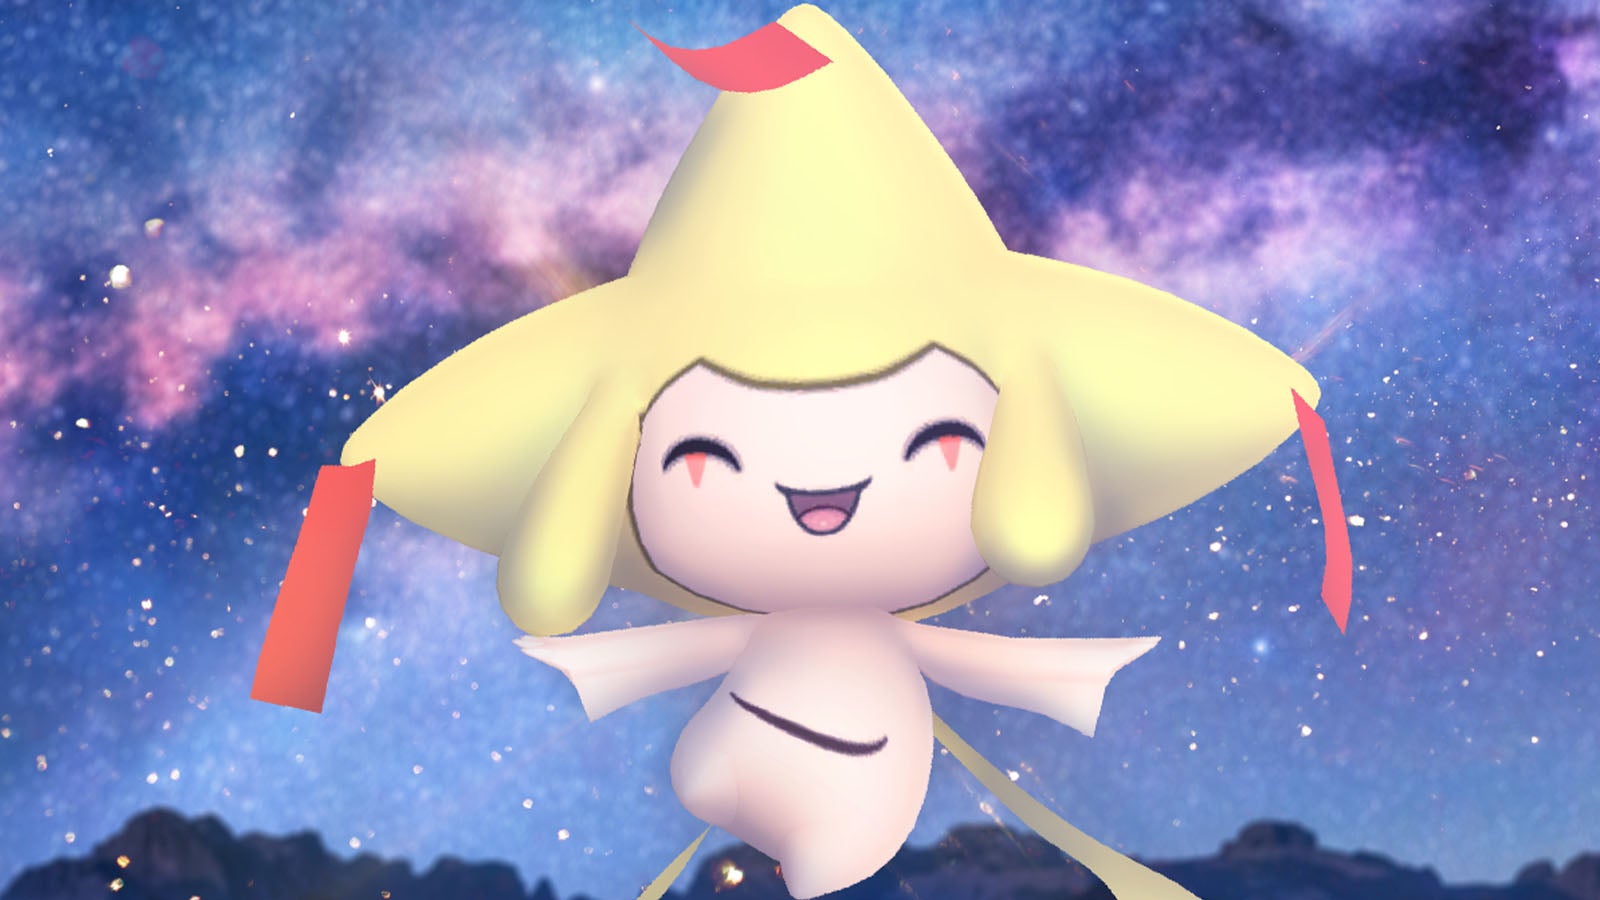 Image for Pokémon Go Masterwork Research Wish Granted quest steps and rewards, including how to get shiny Jirachi